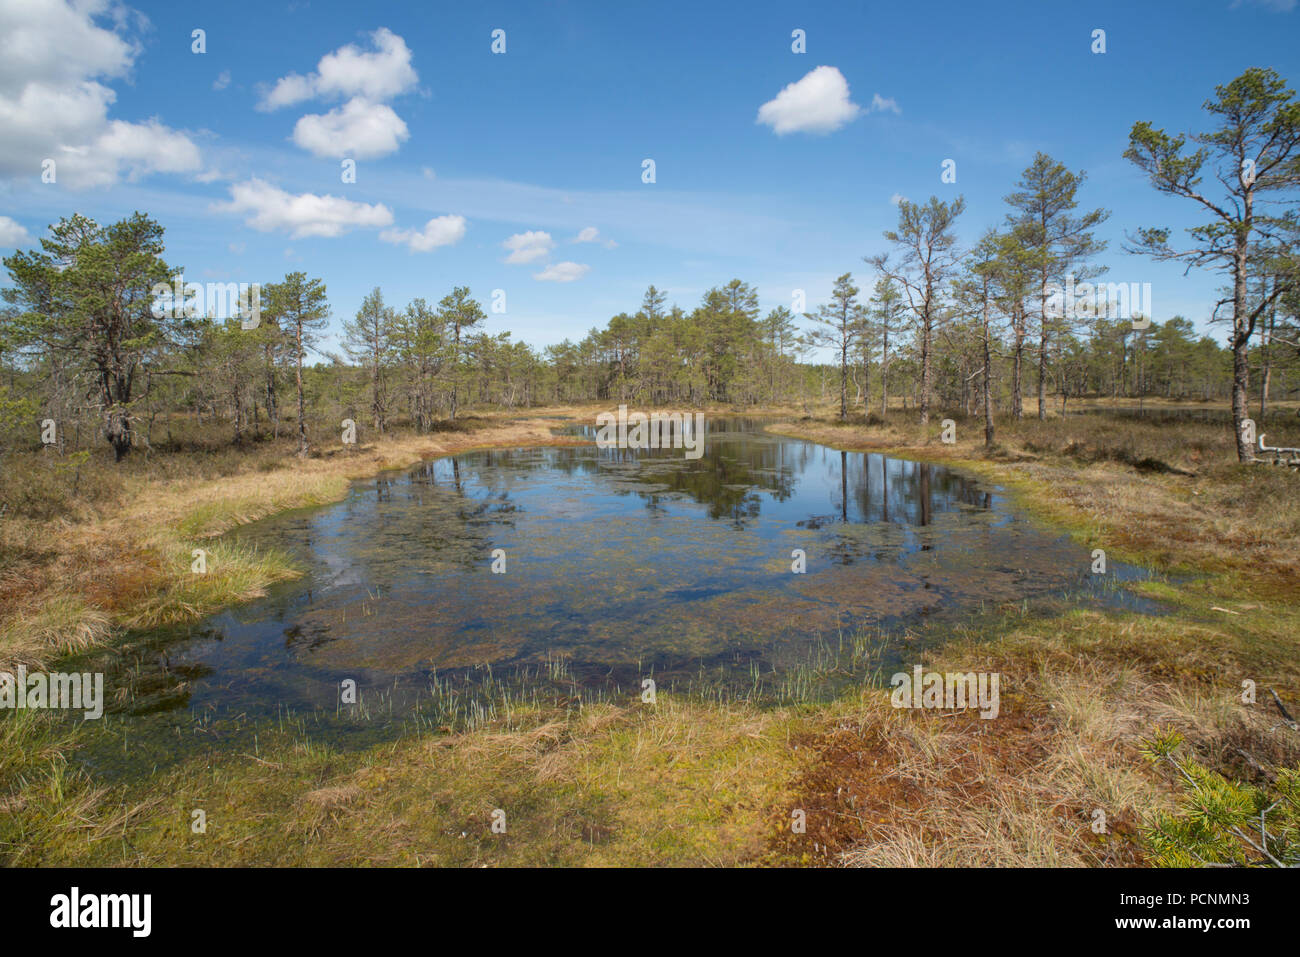 Viru bog, in the Lahemaa National Park, Estonia. A rare and protected area.  The ground is protected by broadwalks as the weight of a human could damag  Stock Photo - Alamy